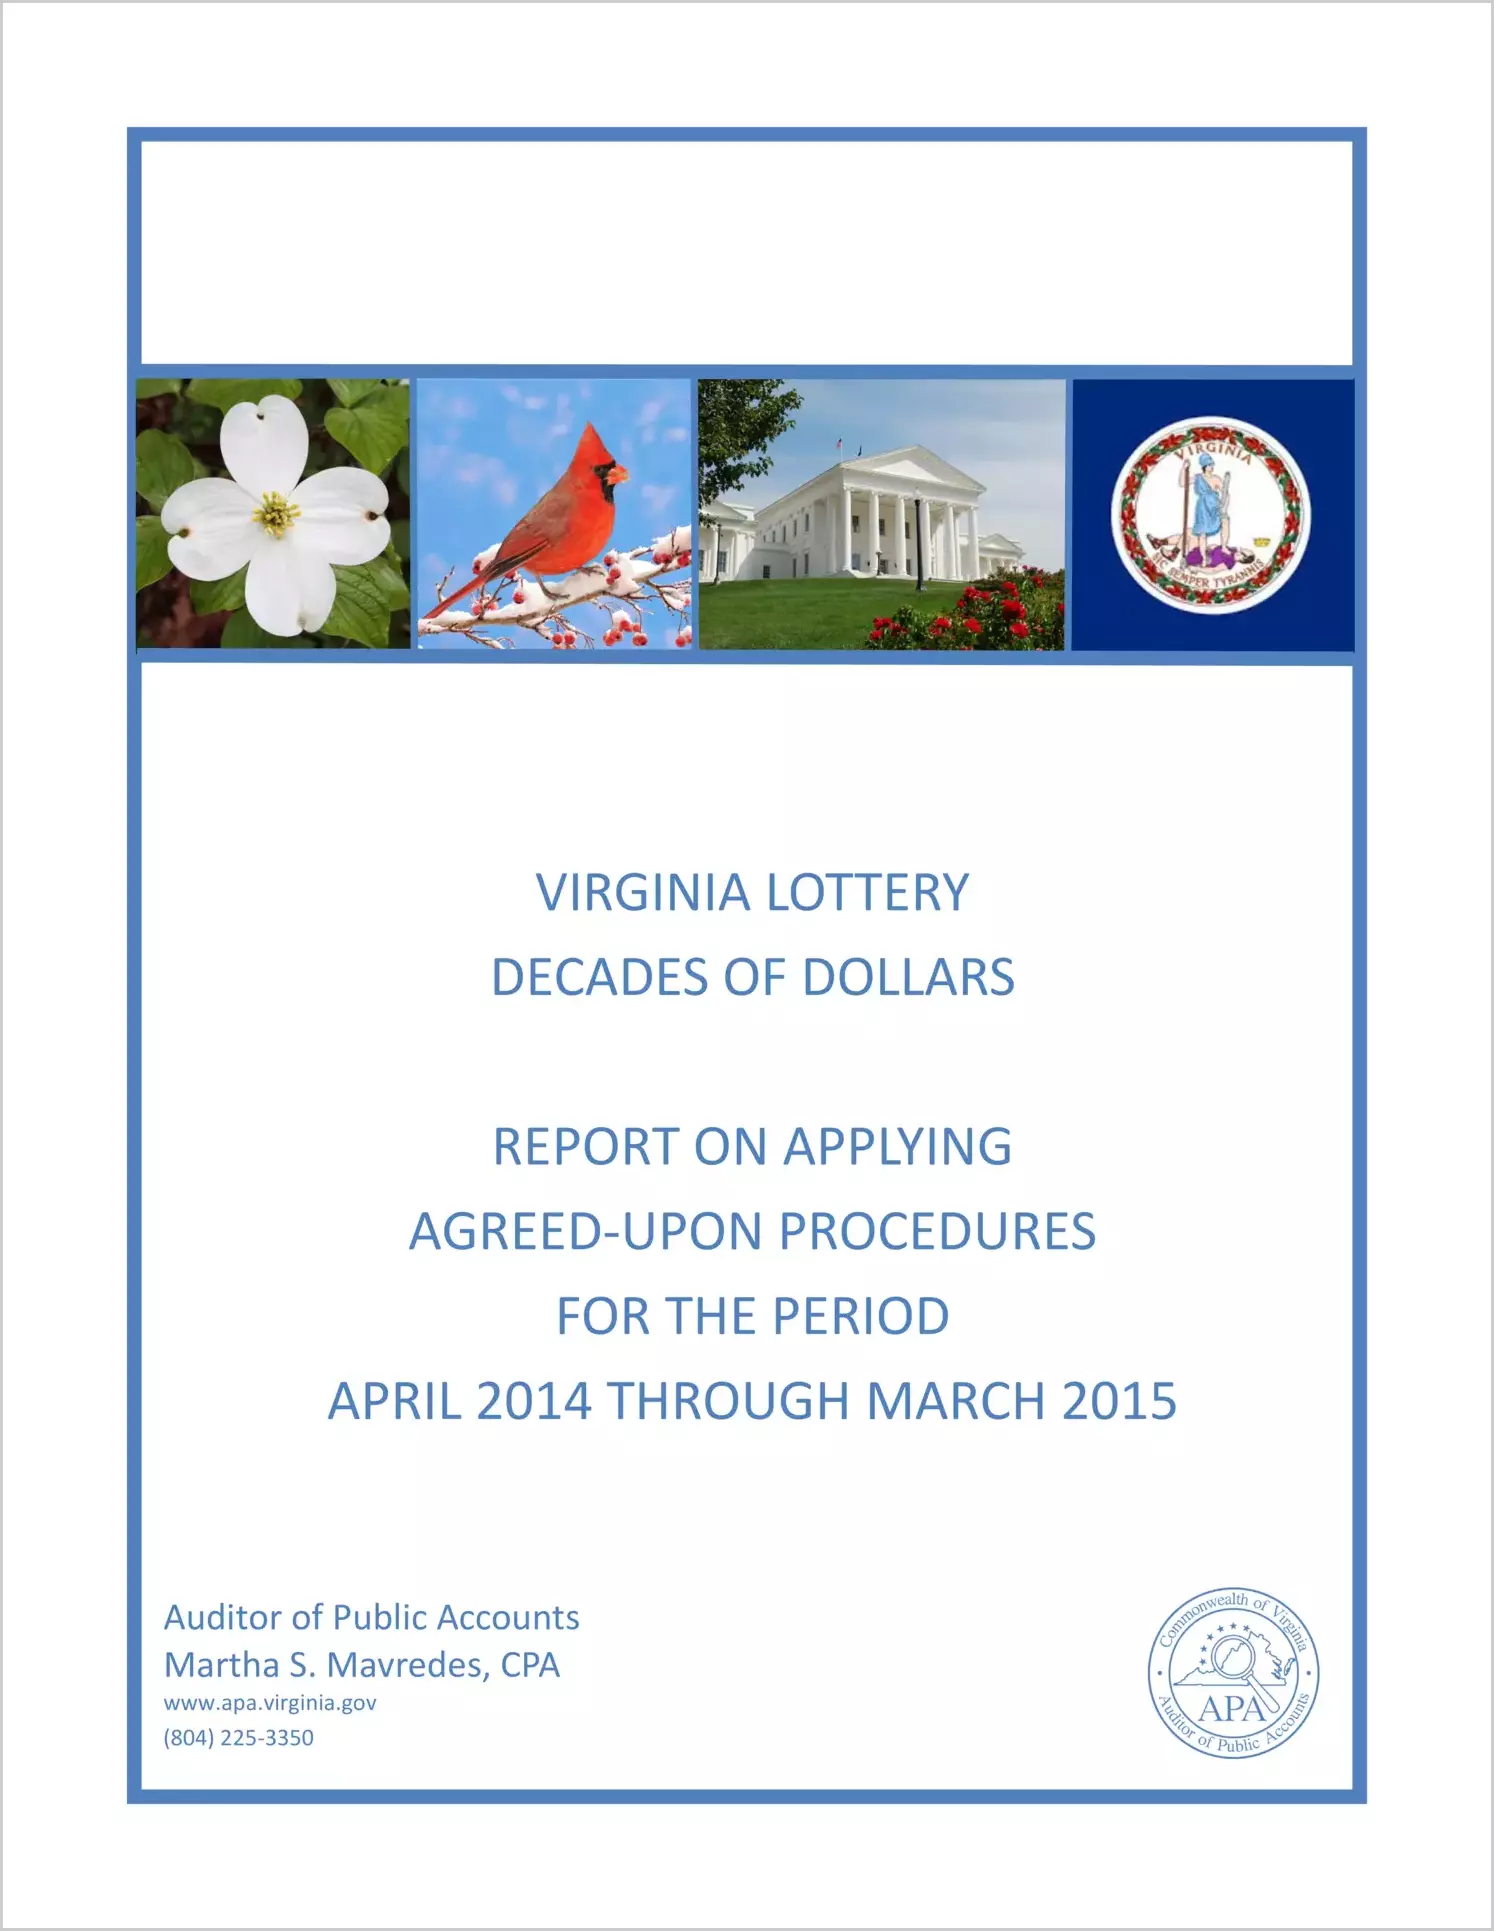 VA Lottery Decades of Dollars report on Applying Agreed-Upon Procedures for the period April, 2014 through March, 2015